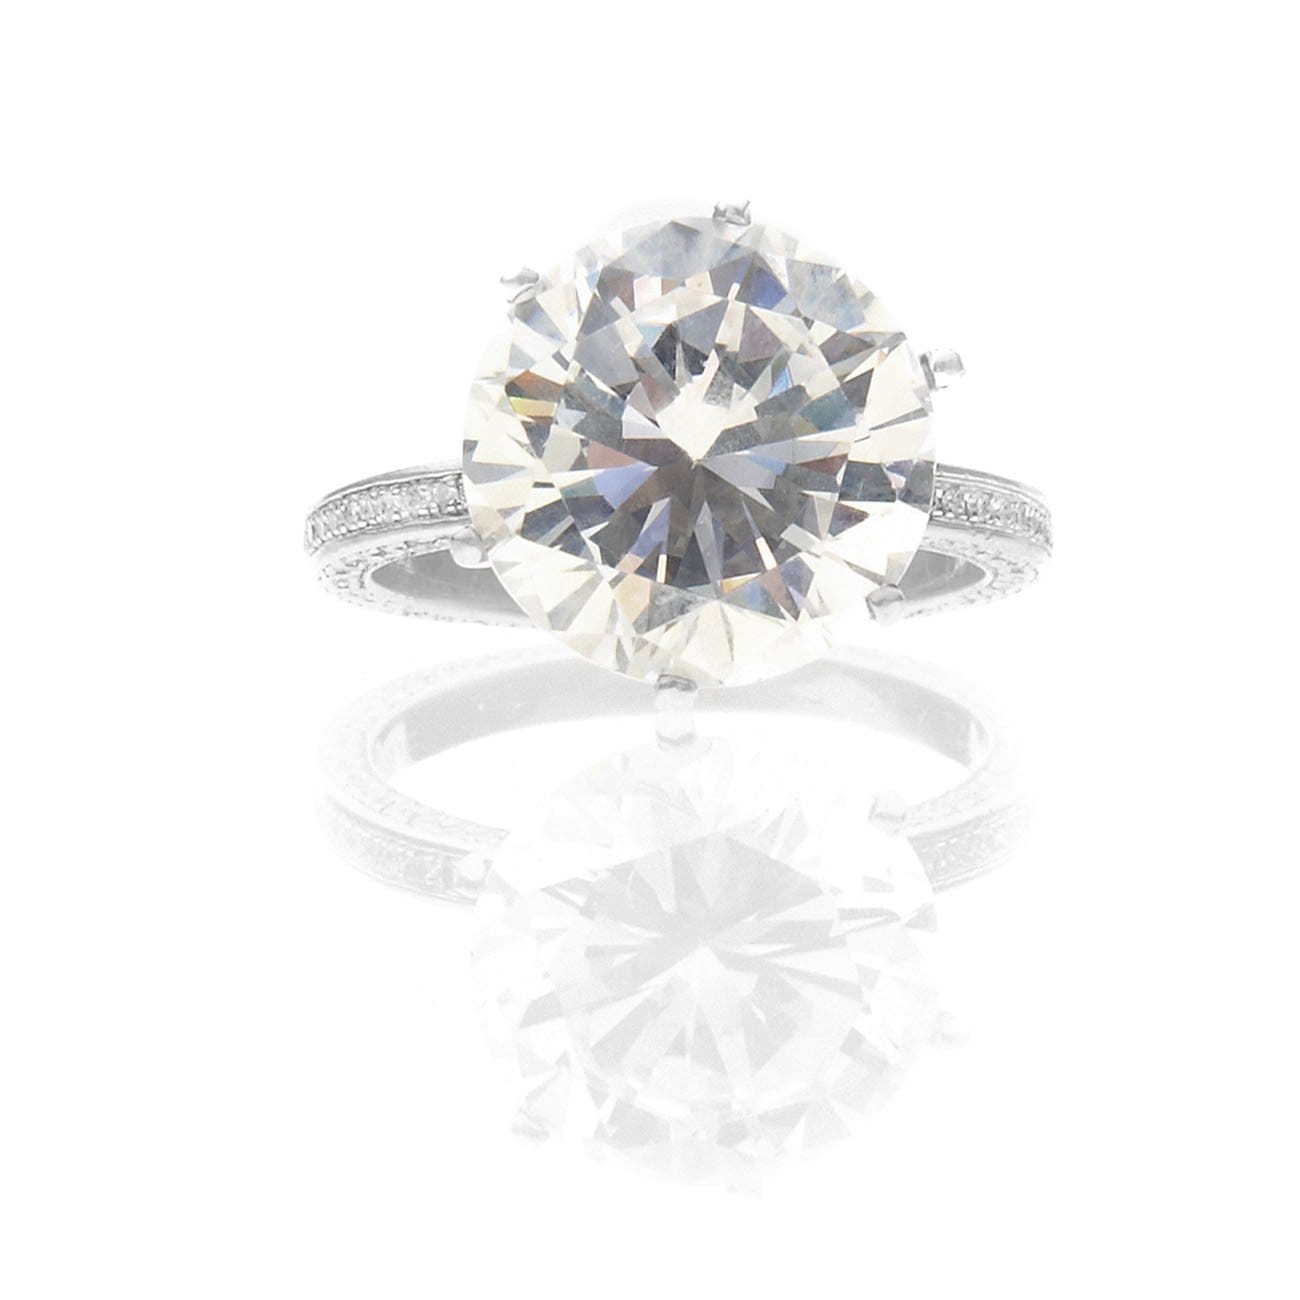 CHRIS AIRE DIAMOND SOLITAIRE CENTER ENGAGEMENT RING - Chris Aire Fine Jewelry & Timepieces